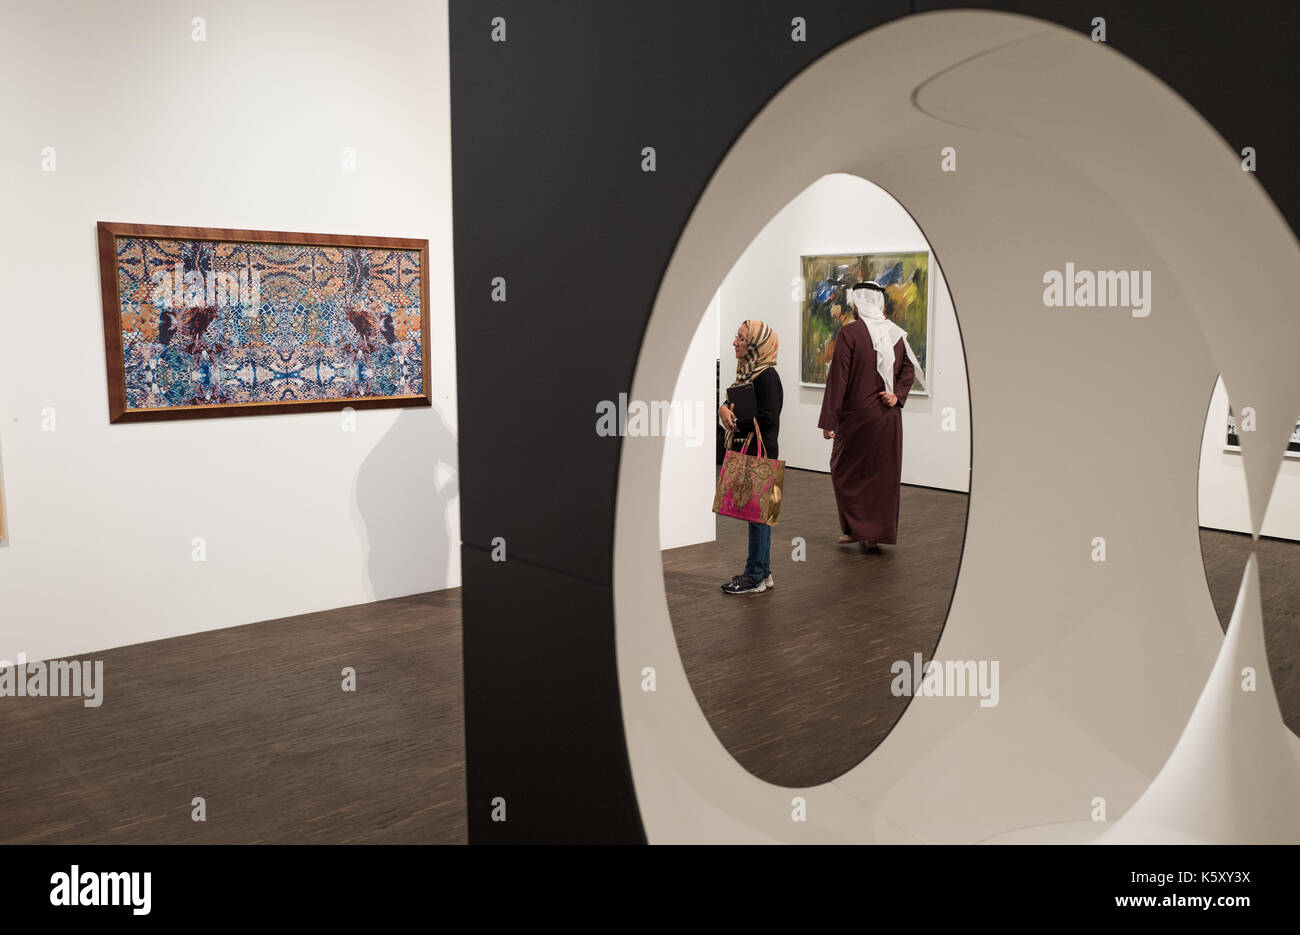 Berlin, Germany. 11th Sep, 2017. A visitor can be seen looking at the work 'Arabian Oryx' of the artist Saeed Al Madani through the installation 'Inner Pilgrimage' of the artist Aisha Juma at the exhibition 'Portrait of a Nation' at the 'me Collectors Room' in Berlin, Germany, 11 September 2017. The exhibition is taking place as part of the Berlin Art Week, which will be held from the 13th to the 17th of September 2017. (ATTENTION EDITORS: EDITORIAL USE ONLY IN CONNECTION WITH CURRENT REPORTING/MANDATORY CREDIT: 'Jörg Carstensen/dpa') Photo: Jörg Carstensen/dpa/Alamy Live News Stock Photo